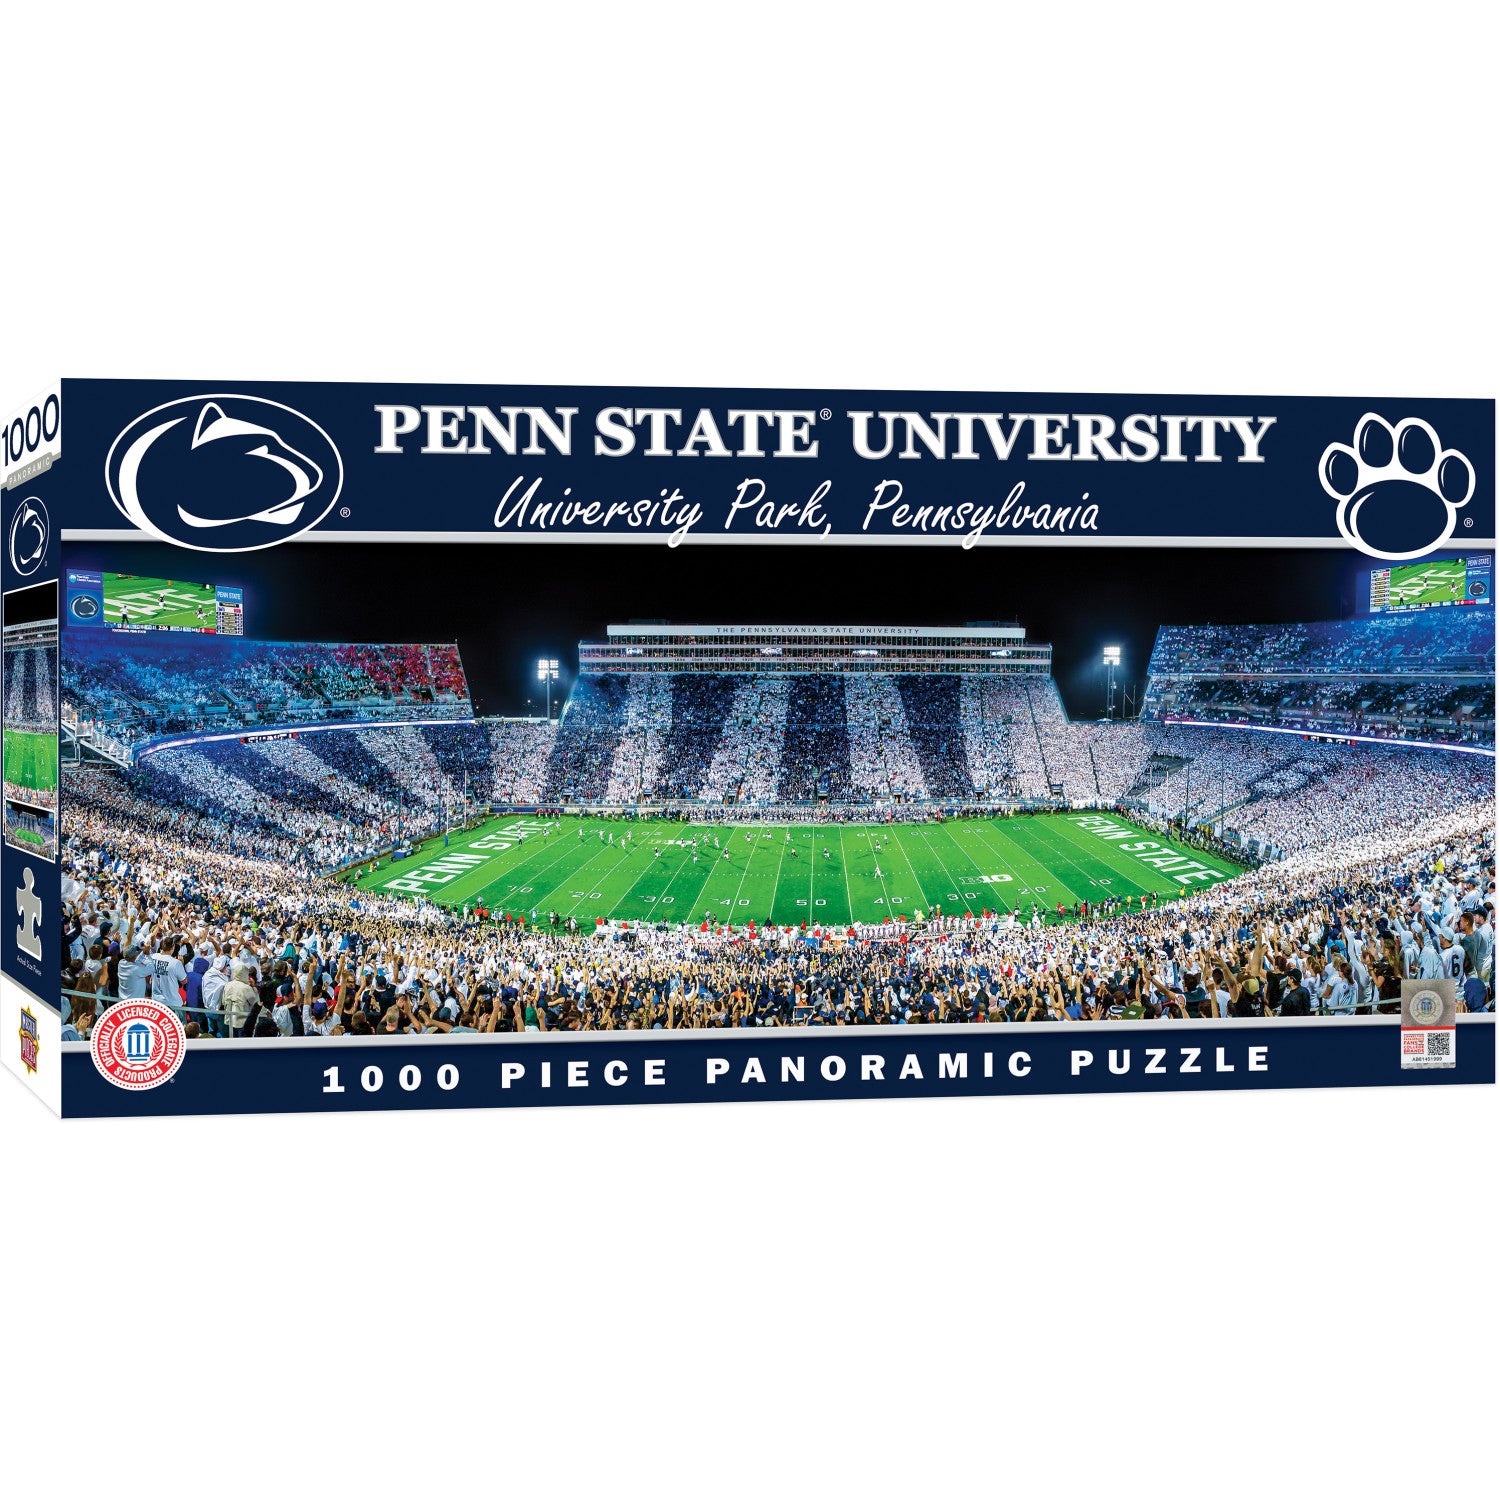 Penn State Nittany Lions - 1000 Piece Panoramic Jigsaw Puzzle - Center View